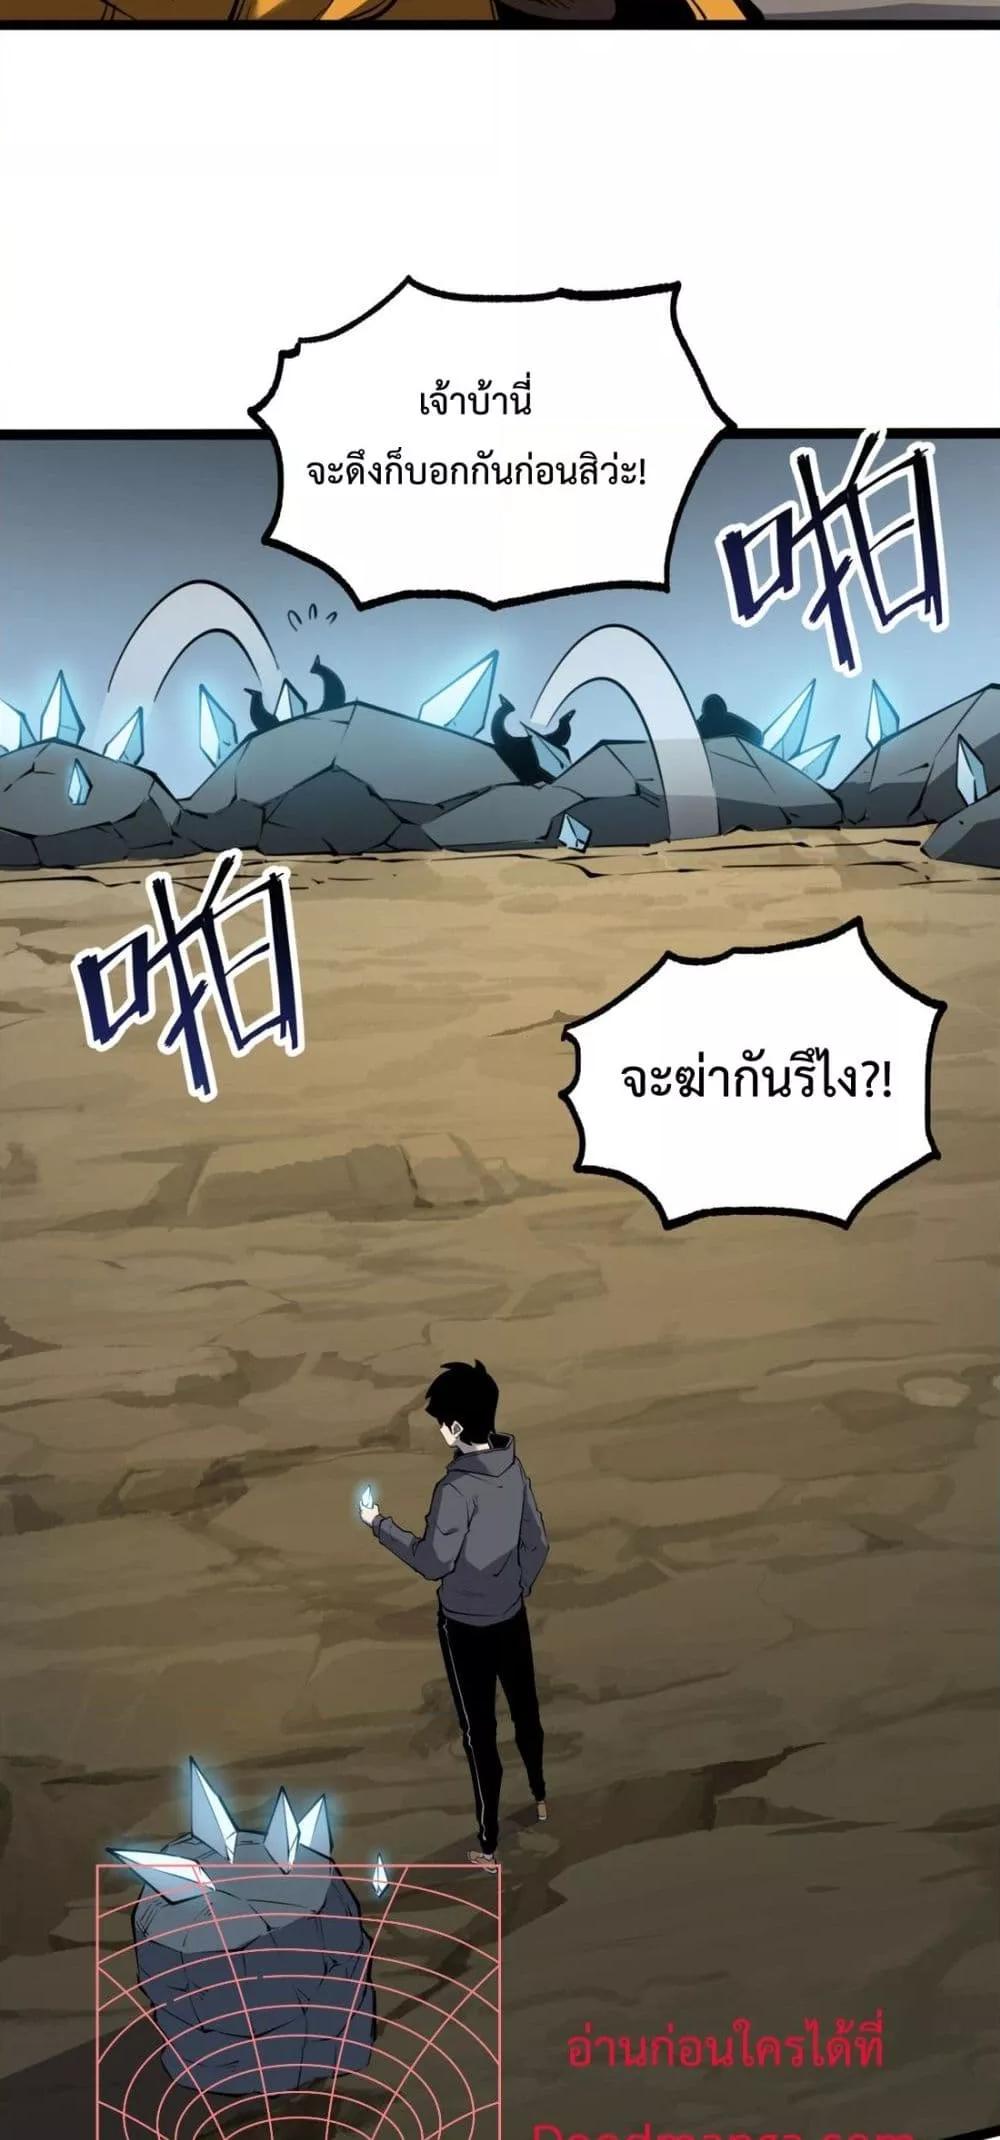 I Became The King by Scavenging ตอนที่ 15 (40)